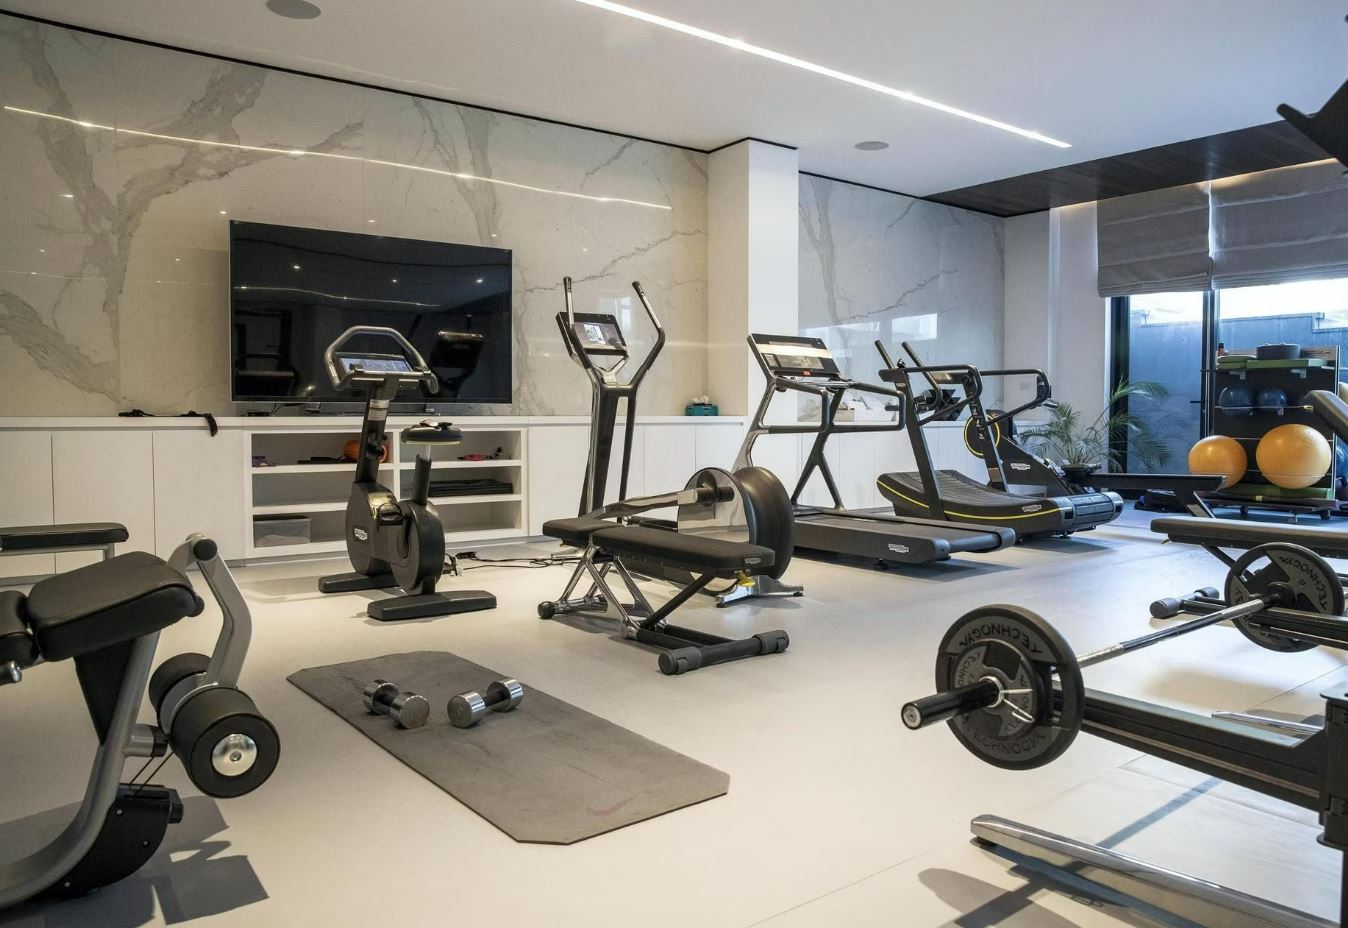 The gym accoutered with state-of-the-art equipment